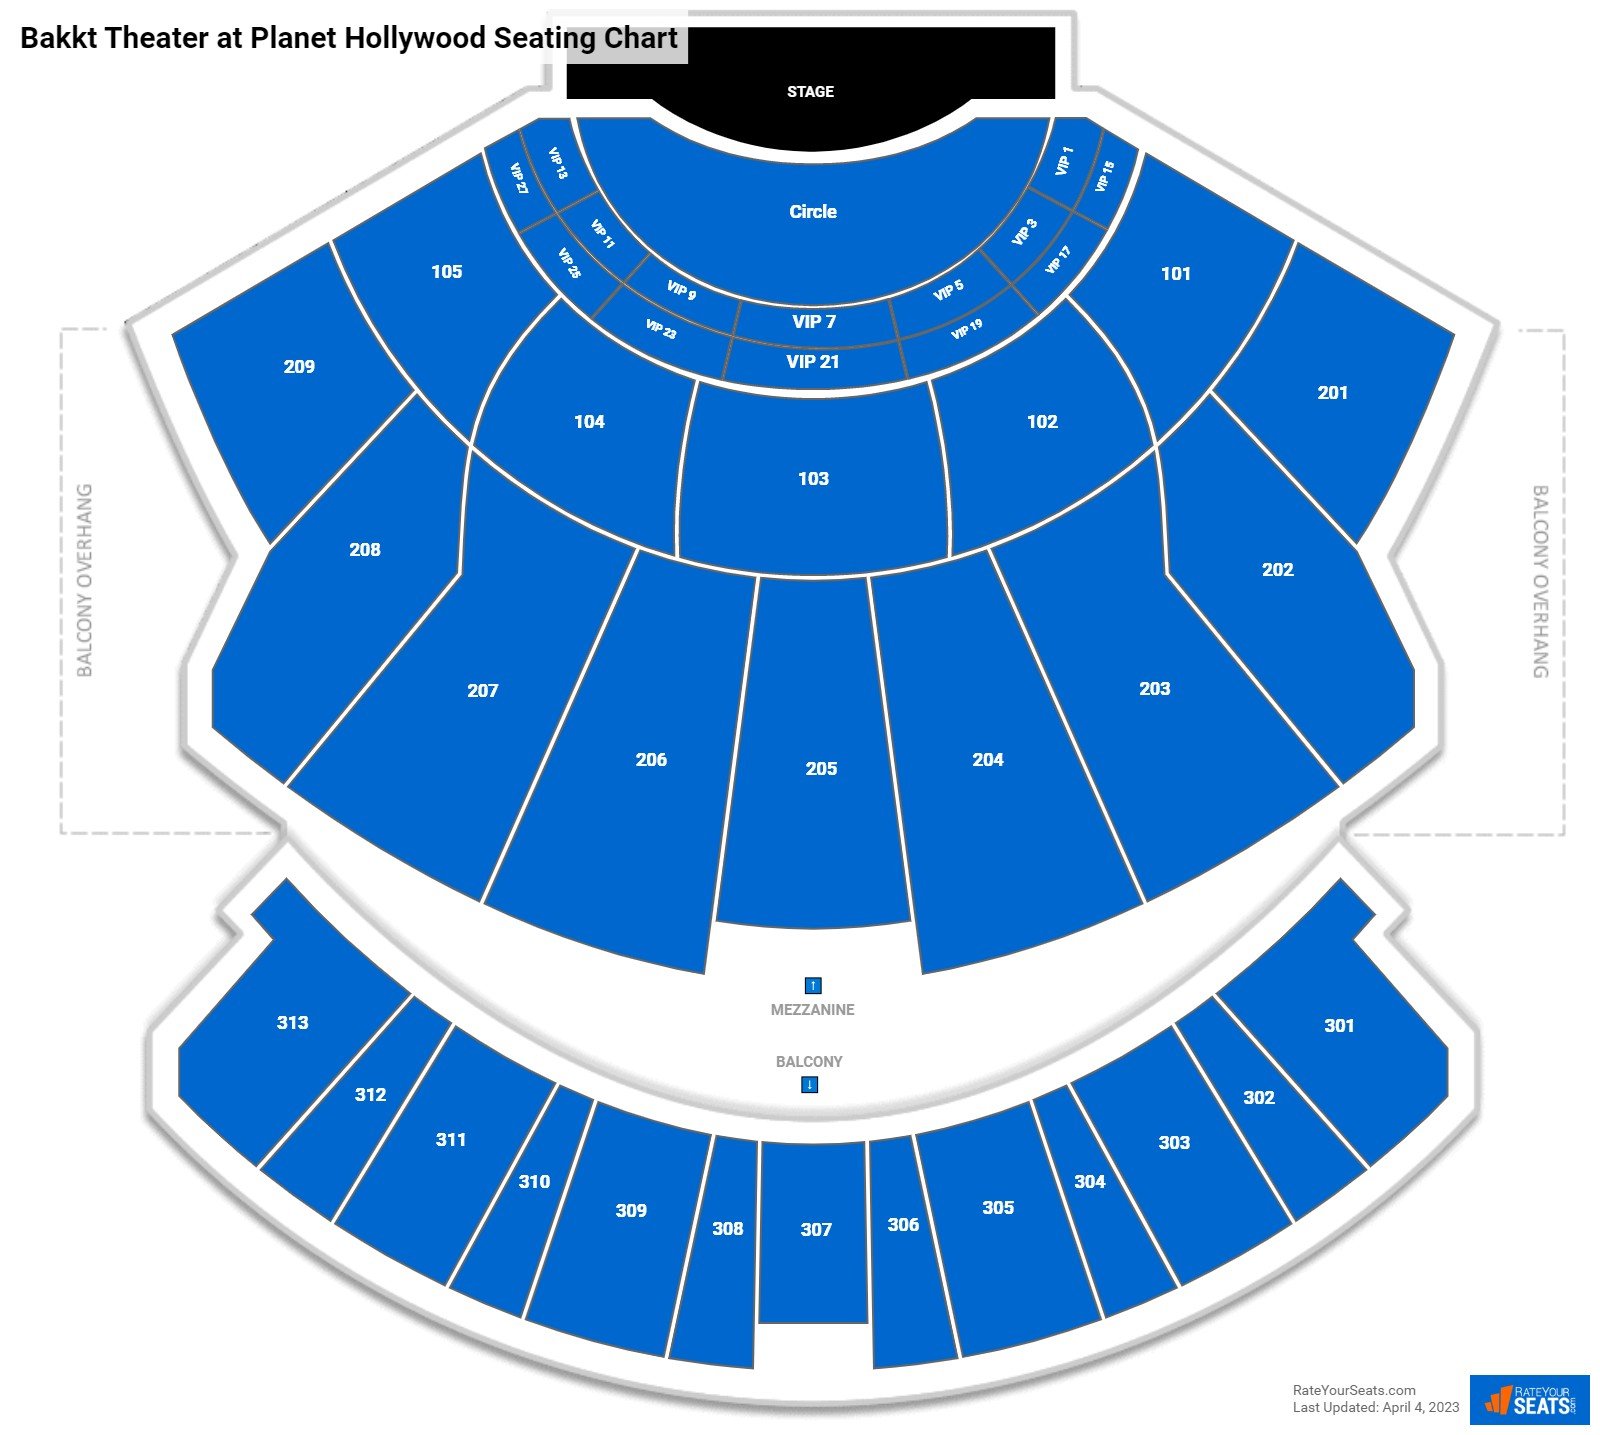 Zappos Theater (Planet Hollywood) Concert Seating Chart